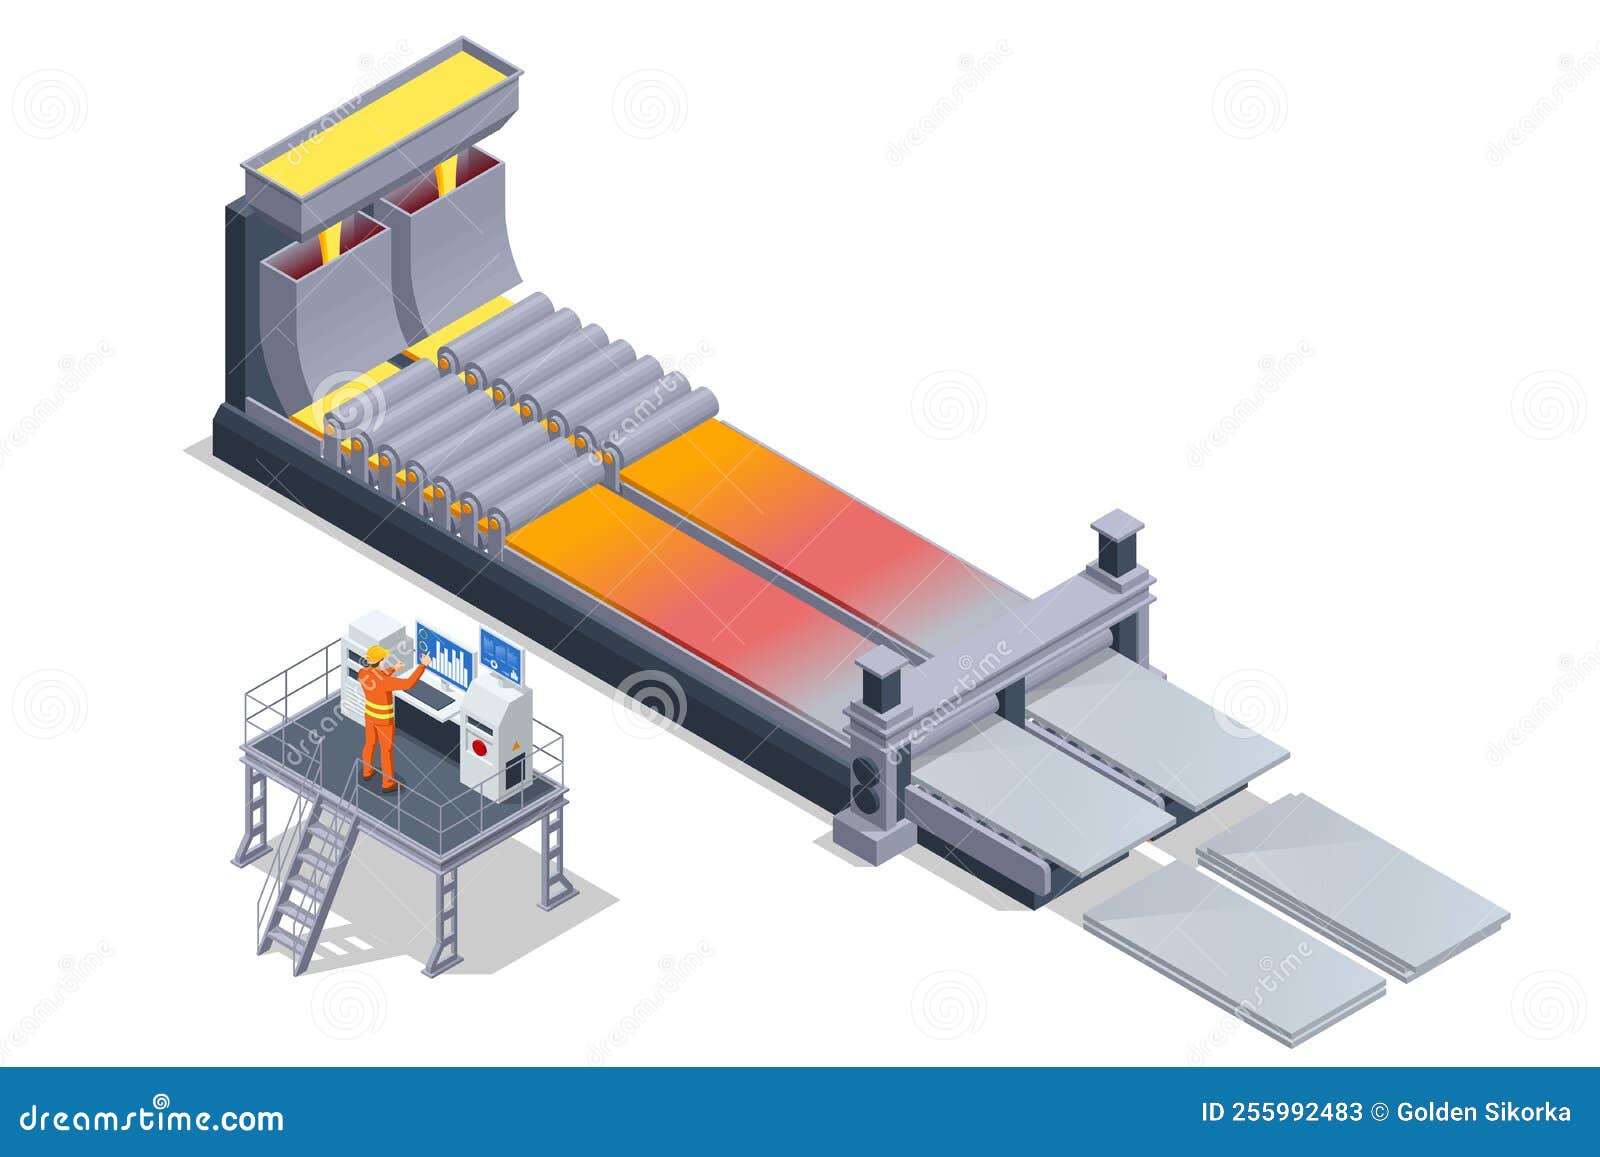 worker-controlling-metal-melting-in-furnaces-isometric-industrial